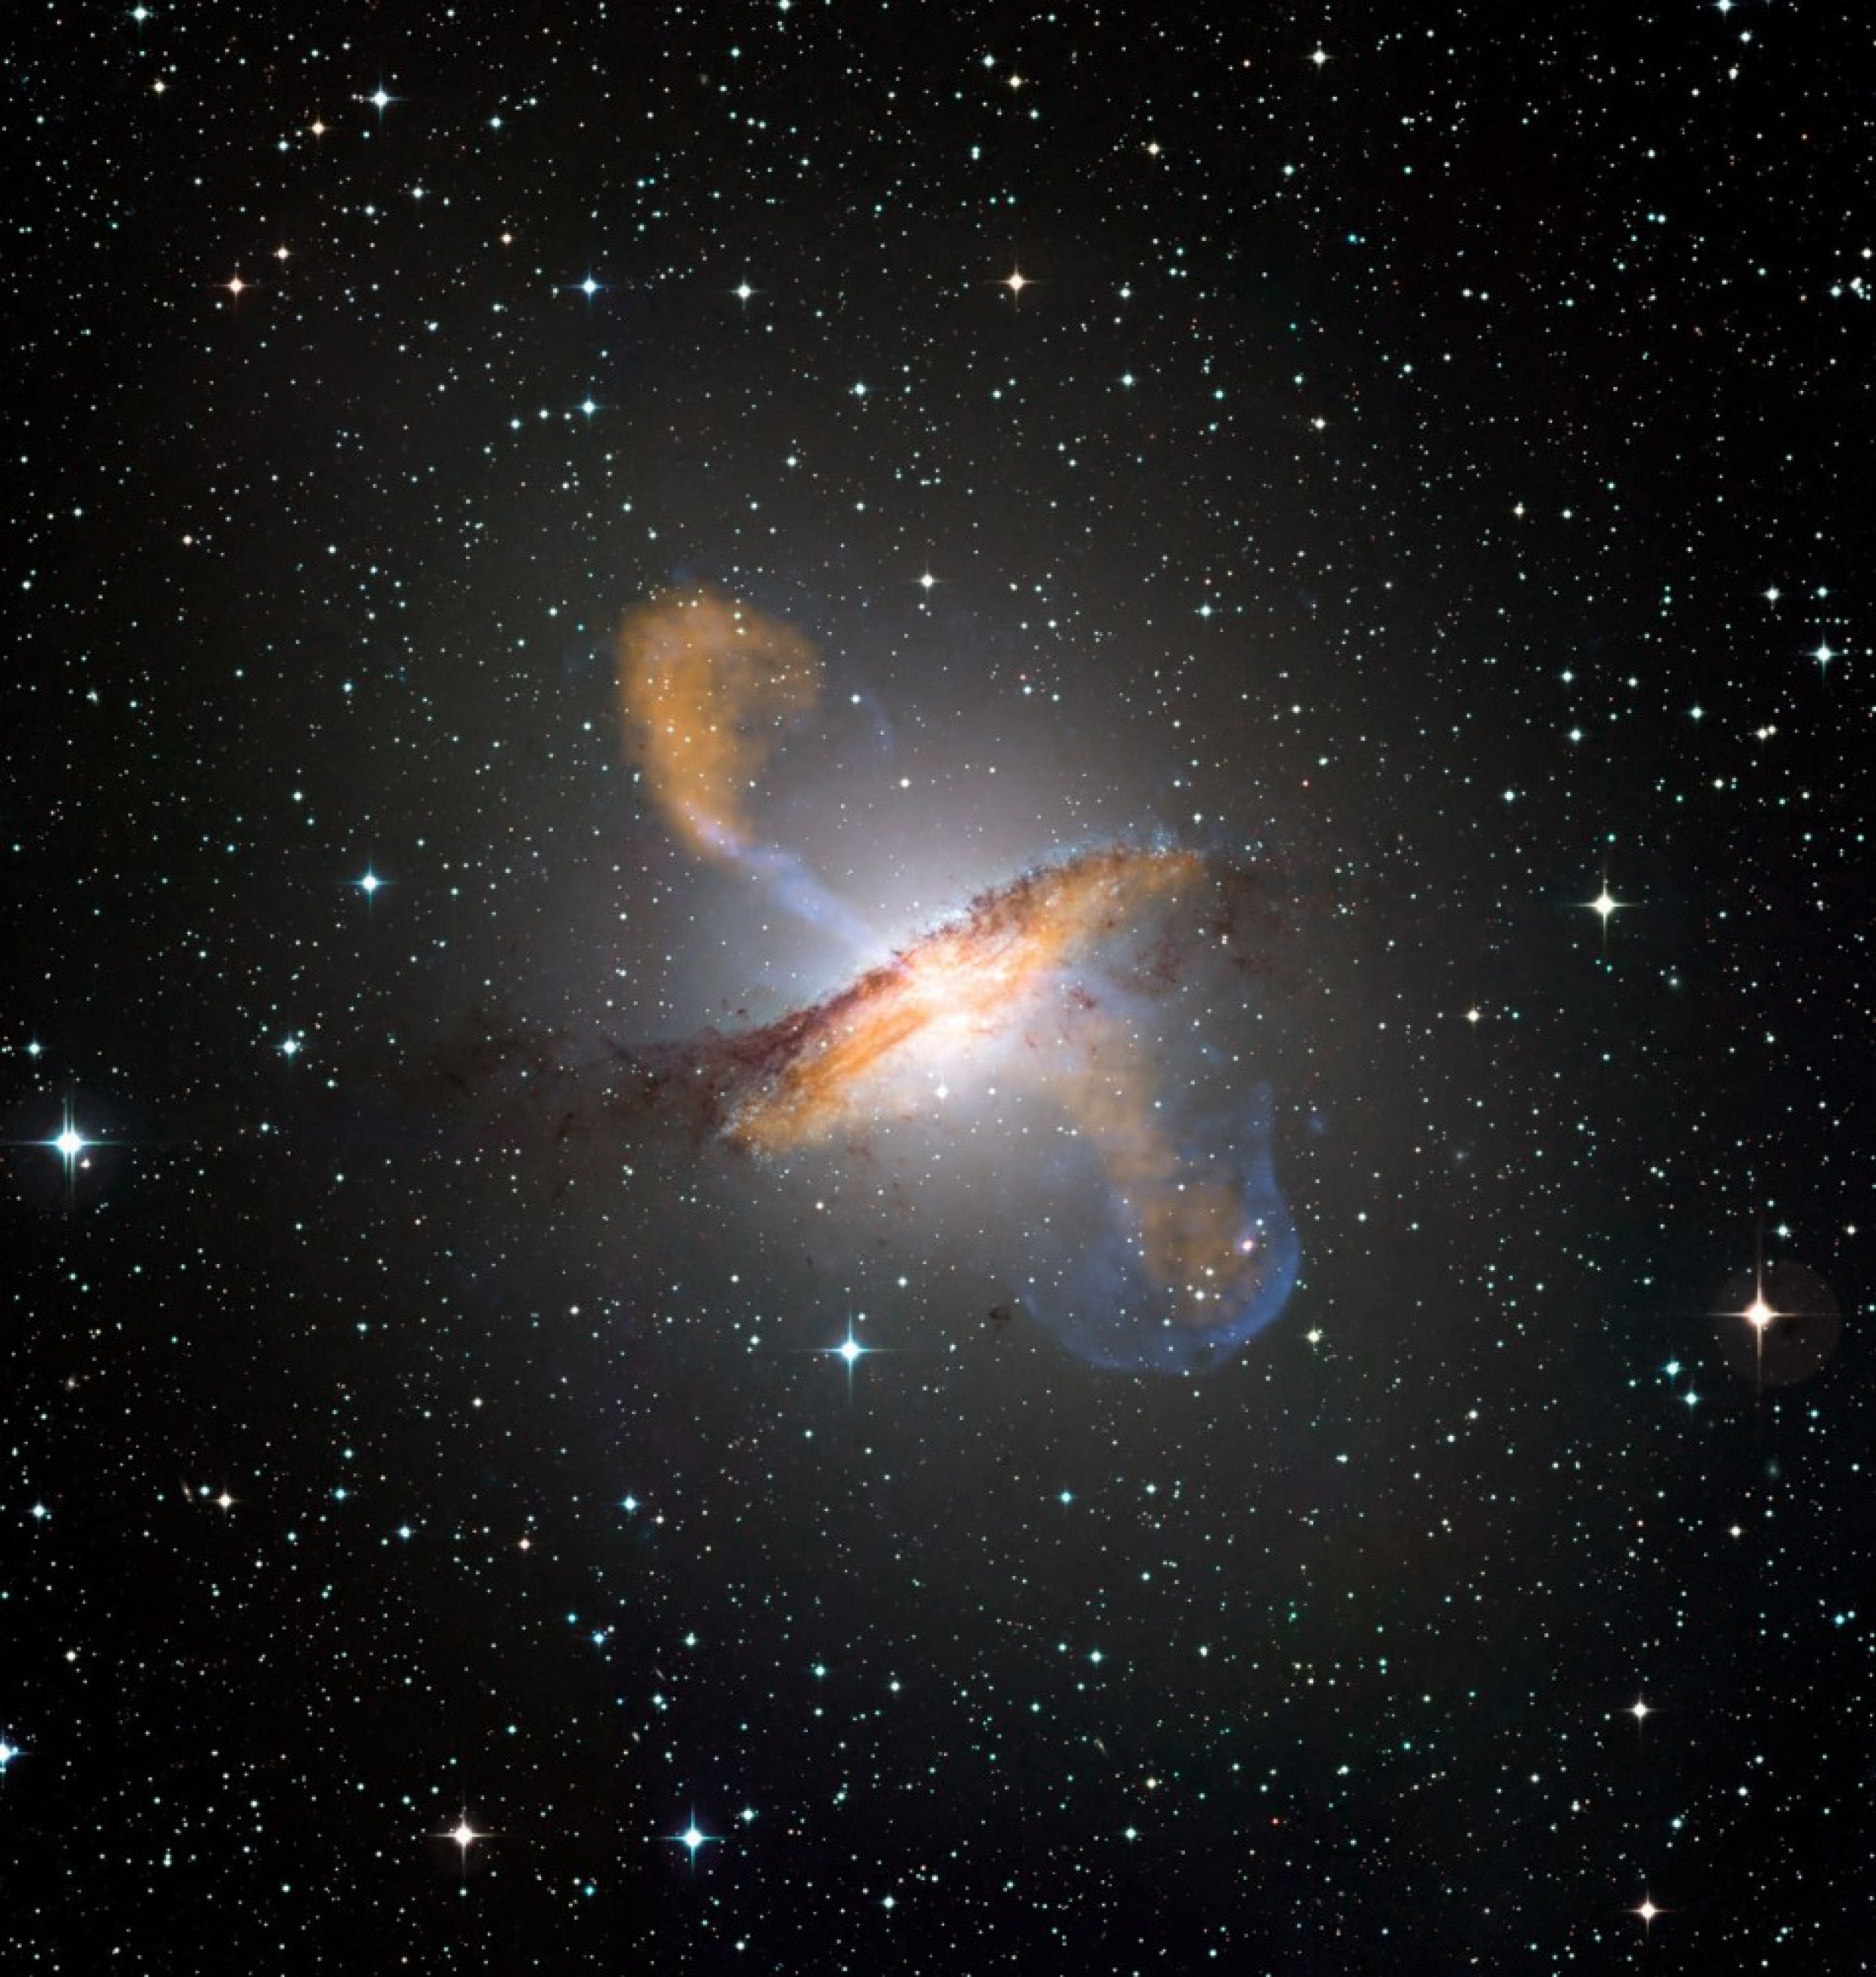 Galaxy that contains black hole in center